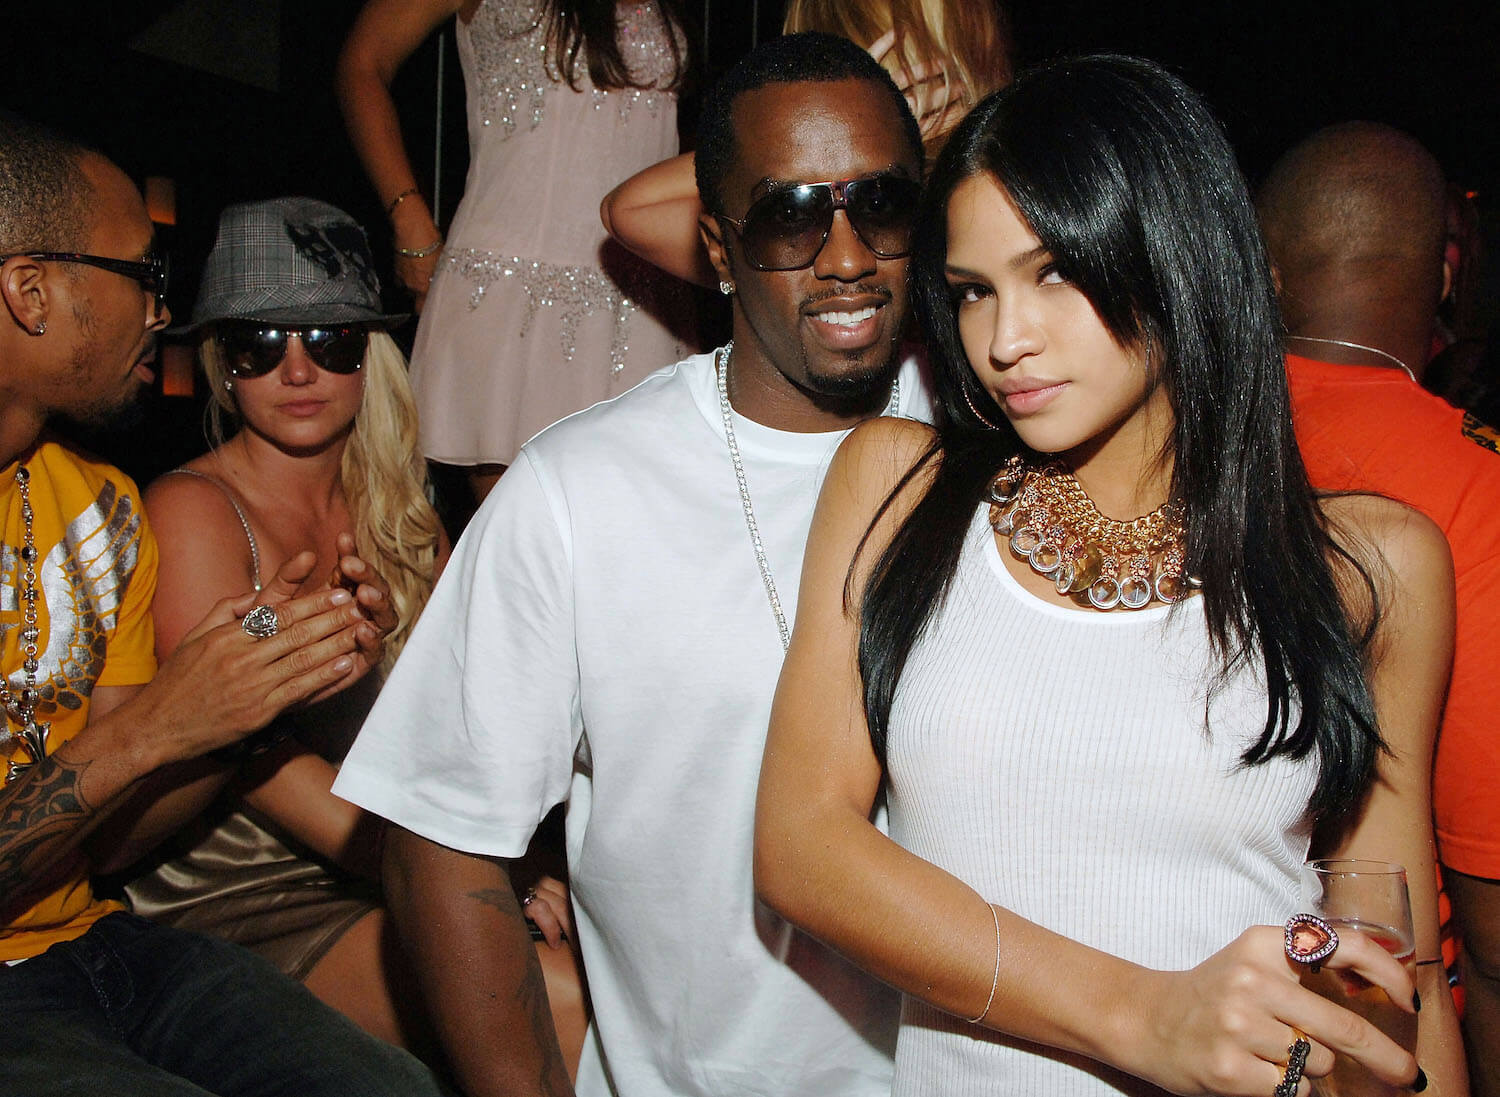 Sean 'P. Diddy' Combs and Casandra 'Cassie' Ventura posing together in front of Britney Spears and others